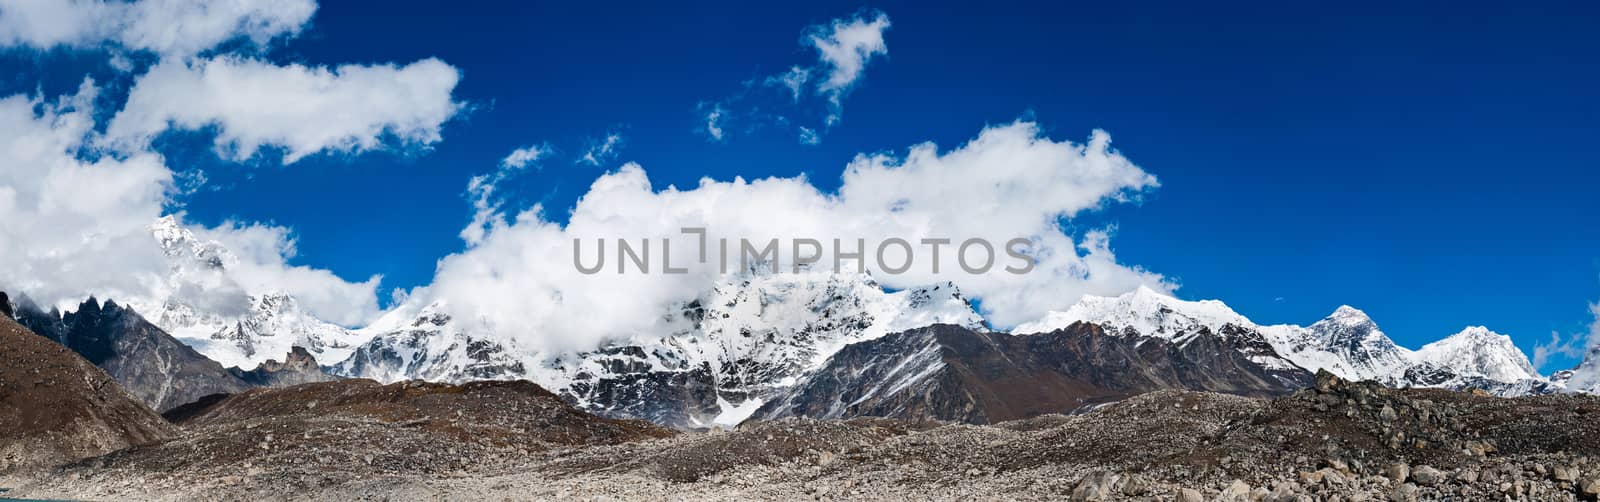 Himalayas panorama with Mountain peaks and Everest summit by Arsgera